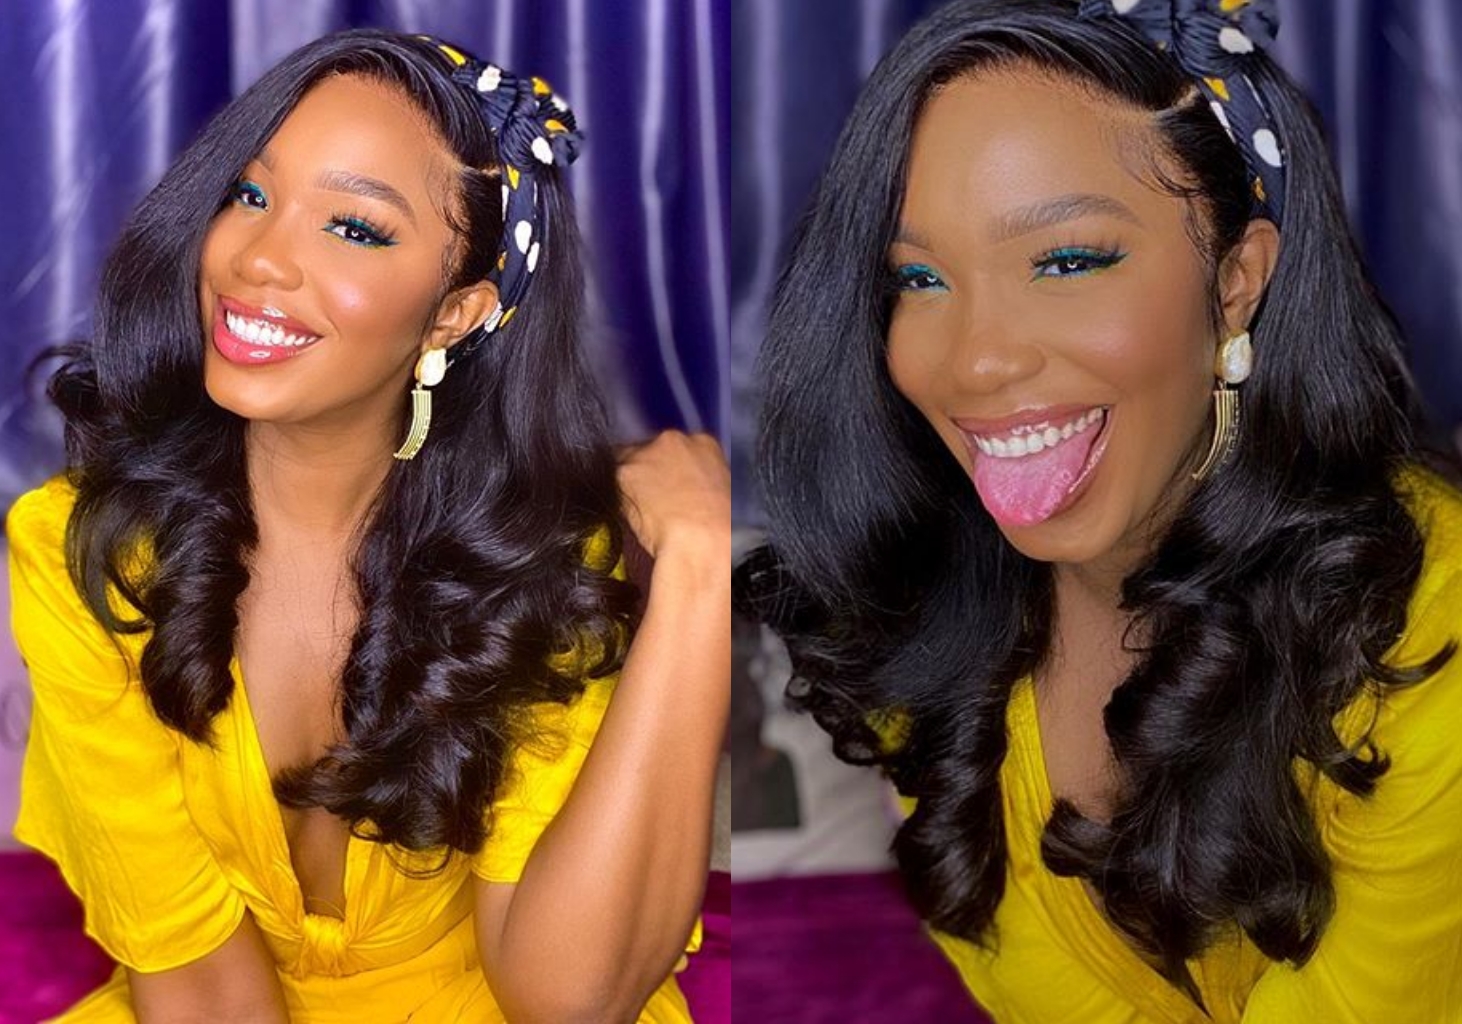 "I feel blessed" – Actress Sharon Ooja gush about her makeup talent (Photos)